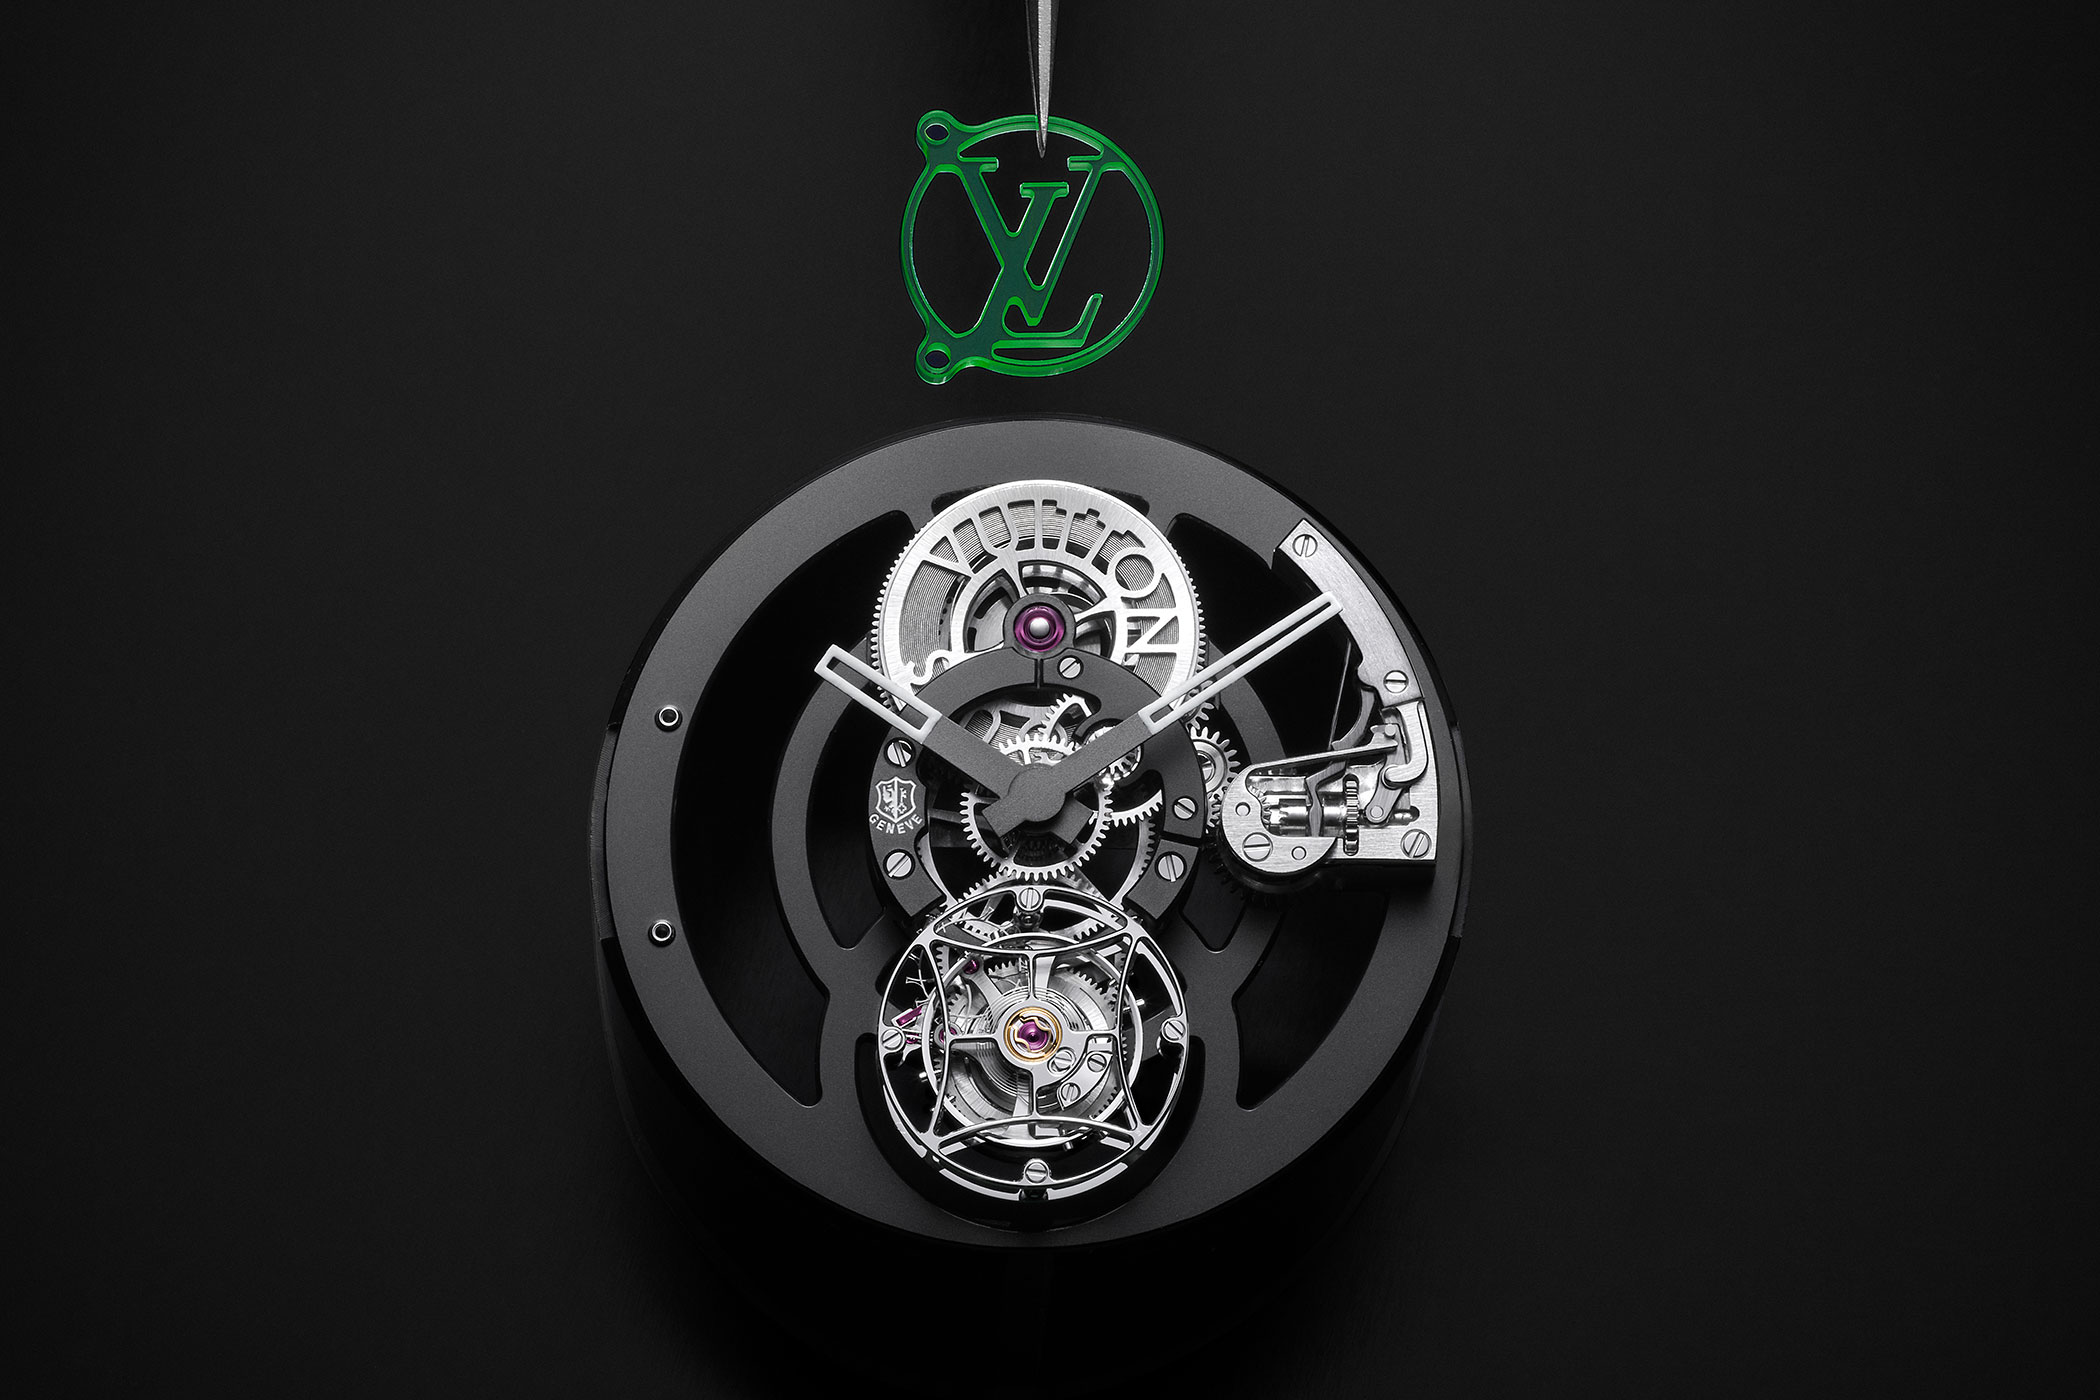 Louis Vuitton presents its newest Tambour Moon watch, the Tambour Moon Dual  Time.